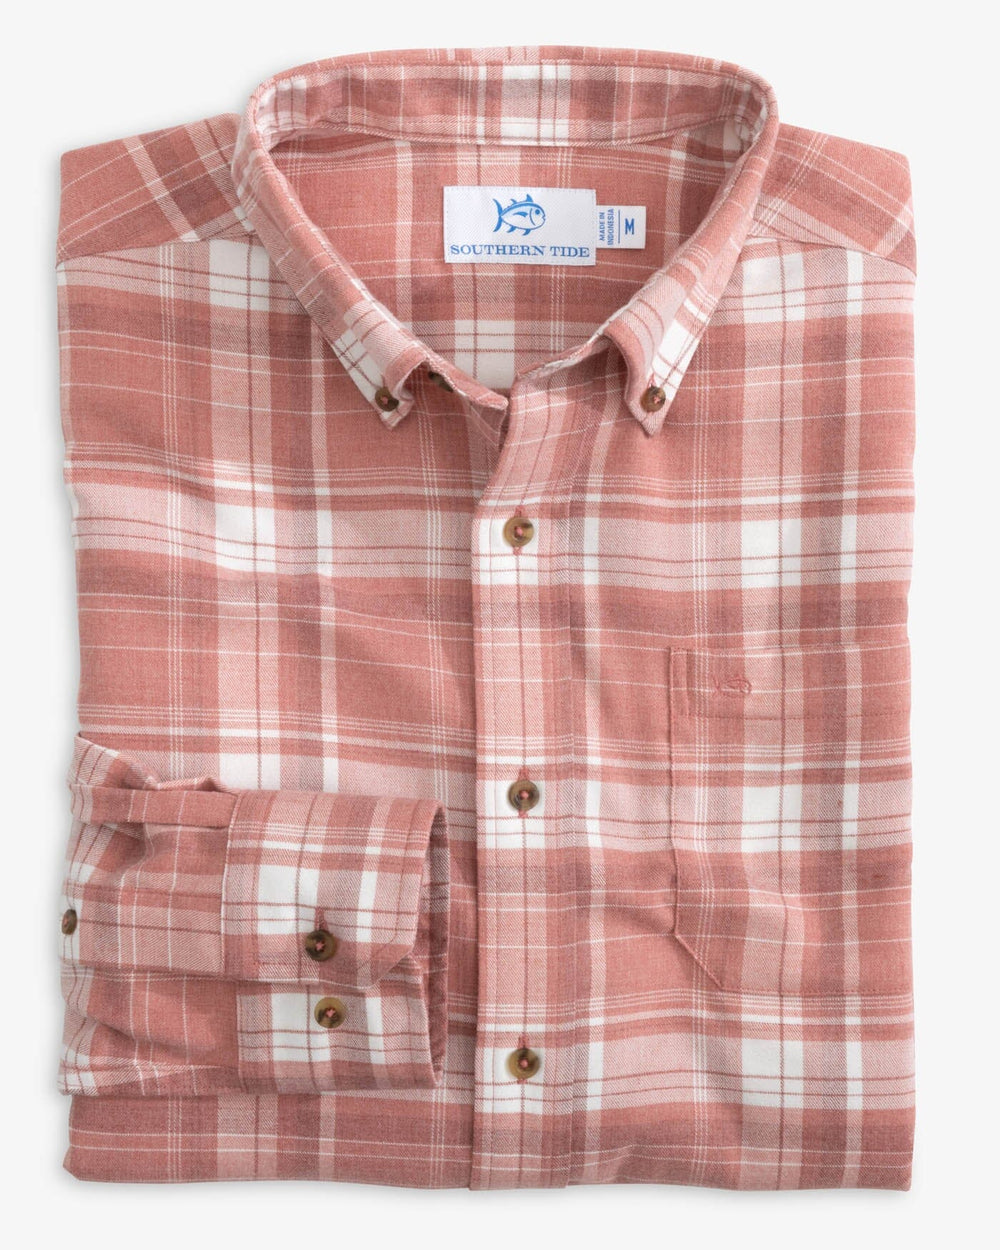 The folded view of the Southern Tide Heather Avondale Plaid Sport Shirt by Southern Tide - Heather Dusty Coral